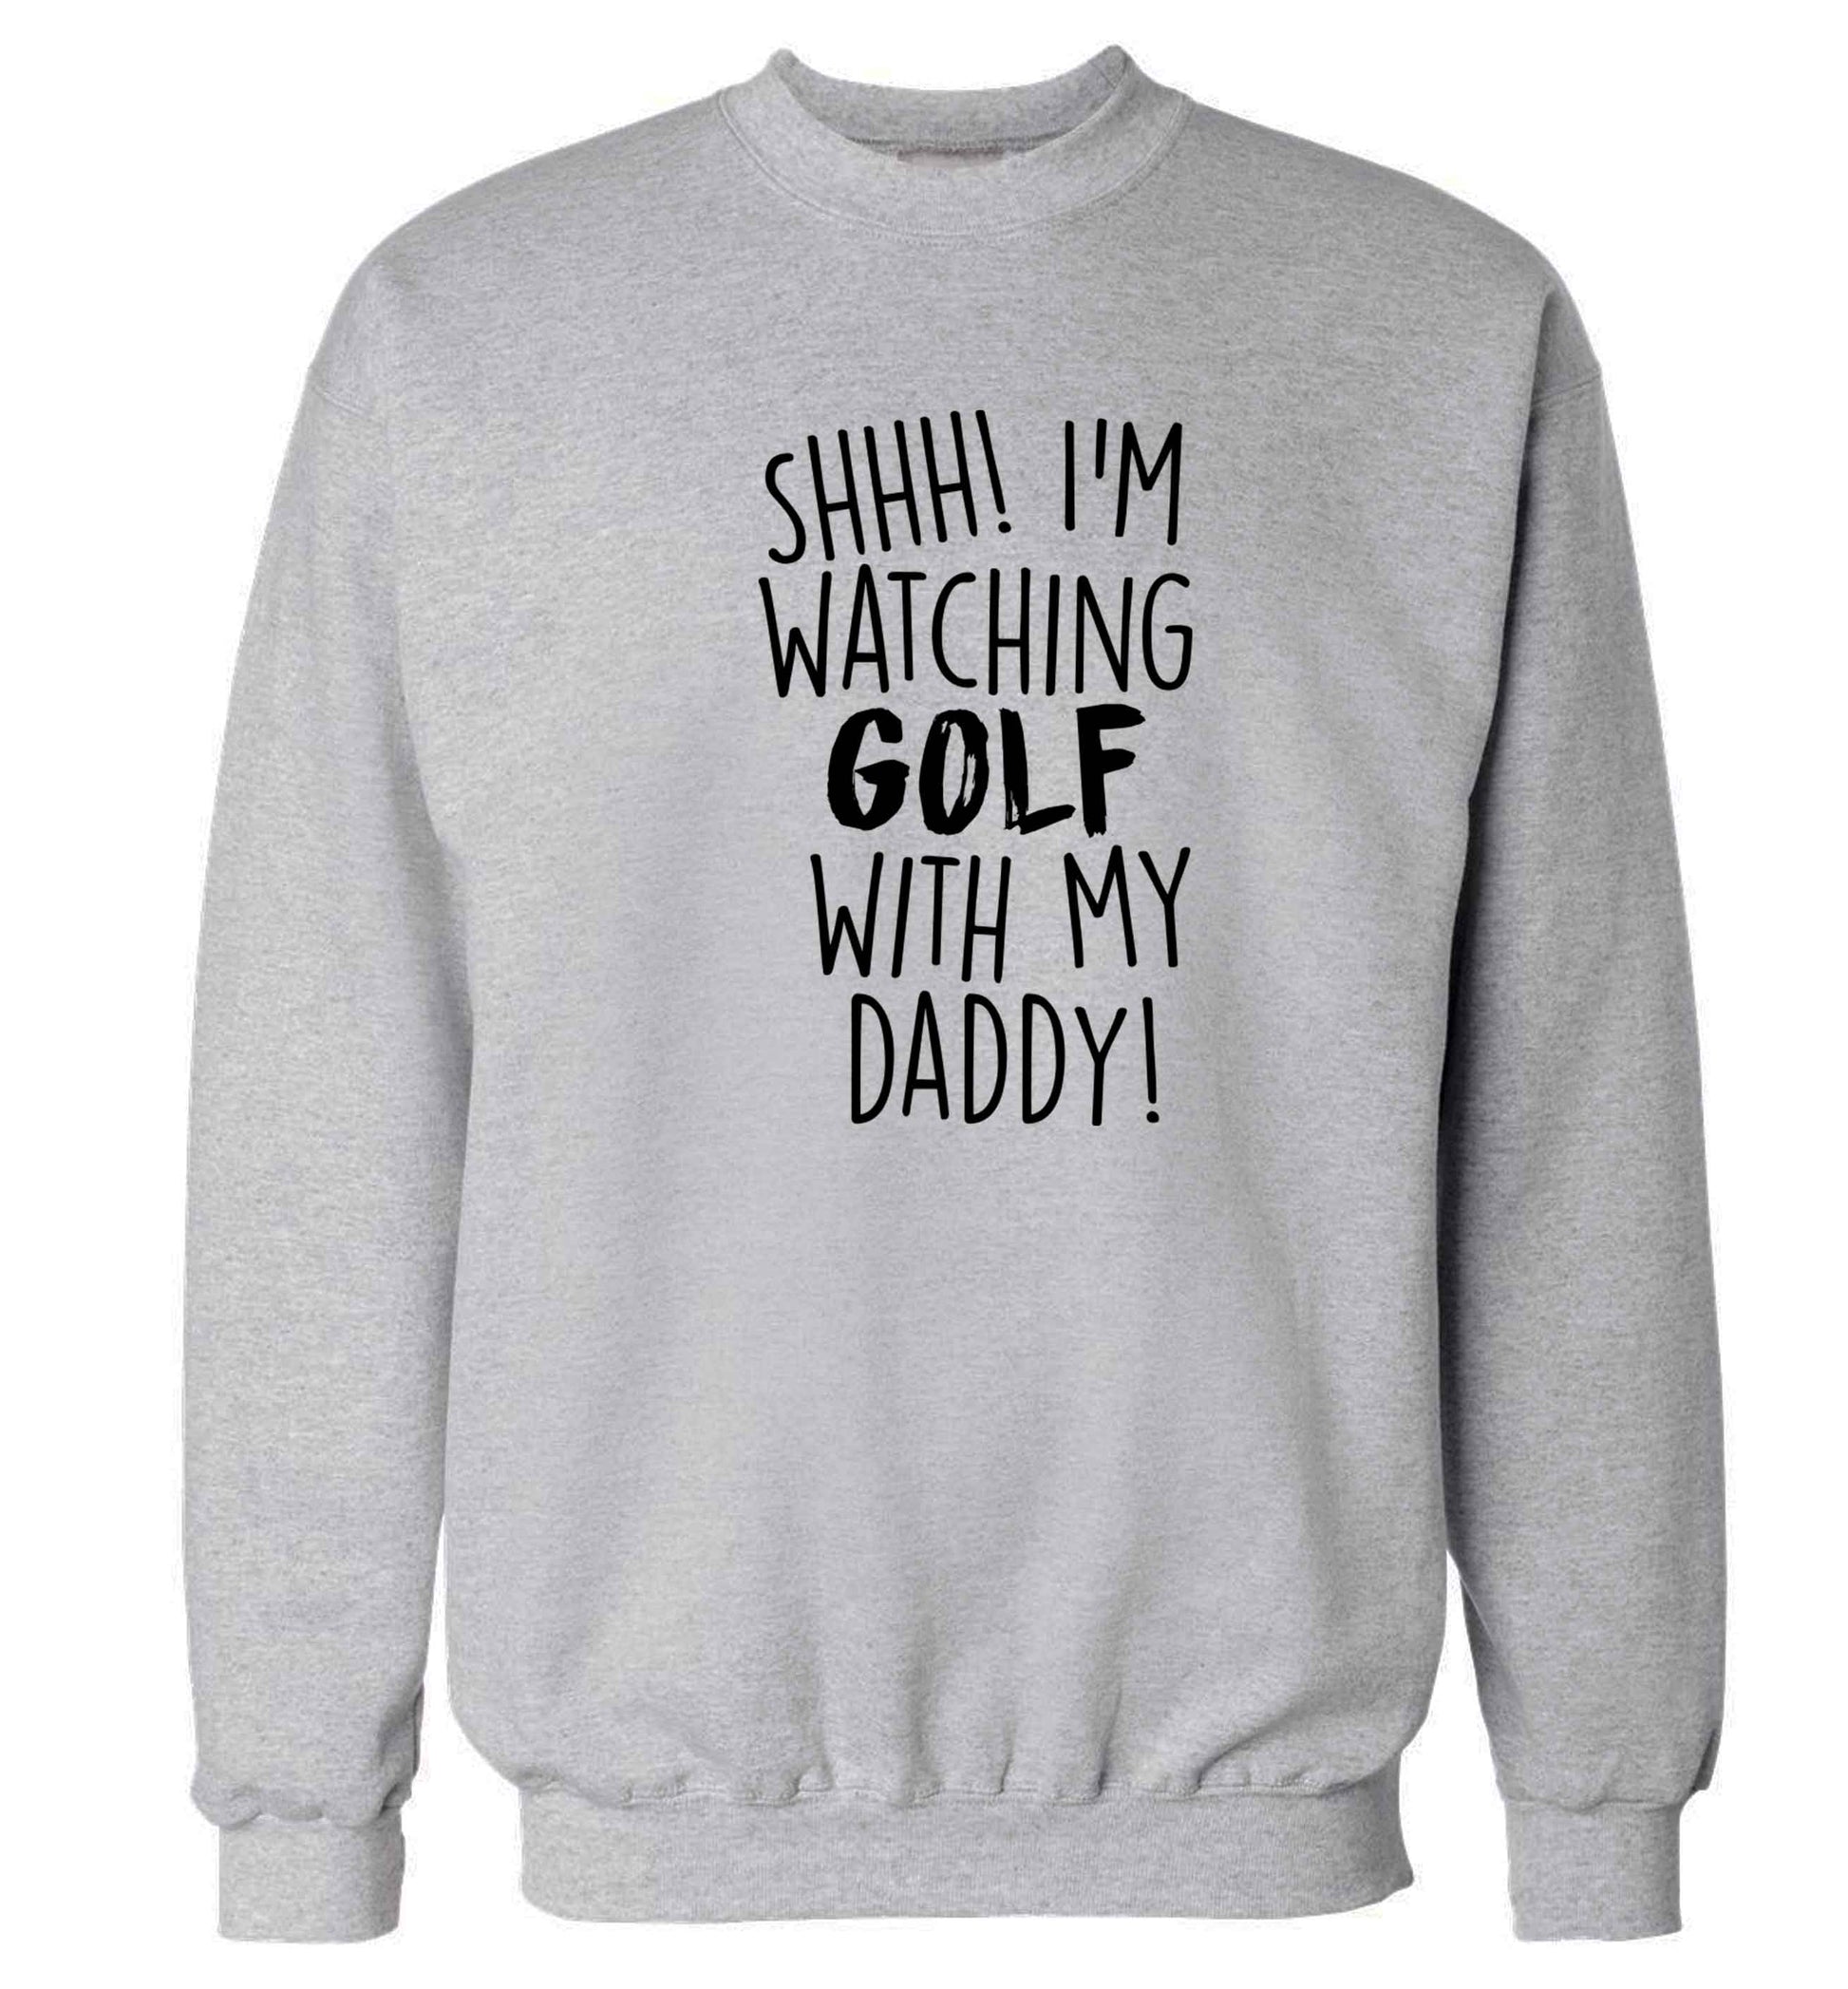 Shh I'm watching golf with my daddy Adult's unisex grey Sweater 2XL